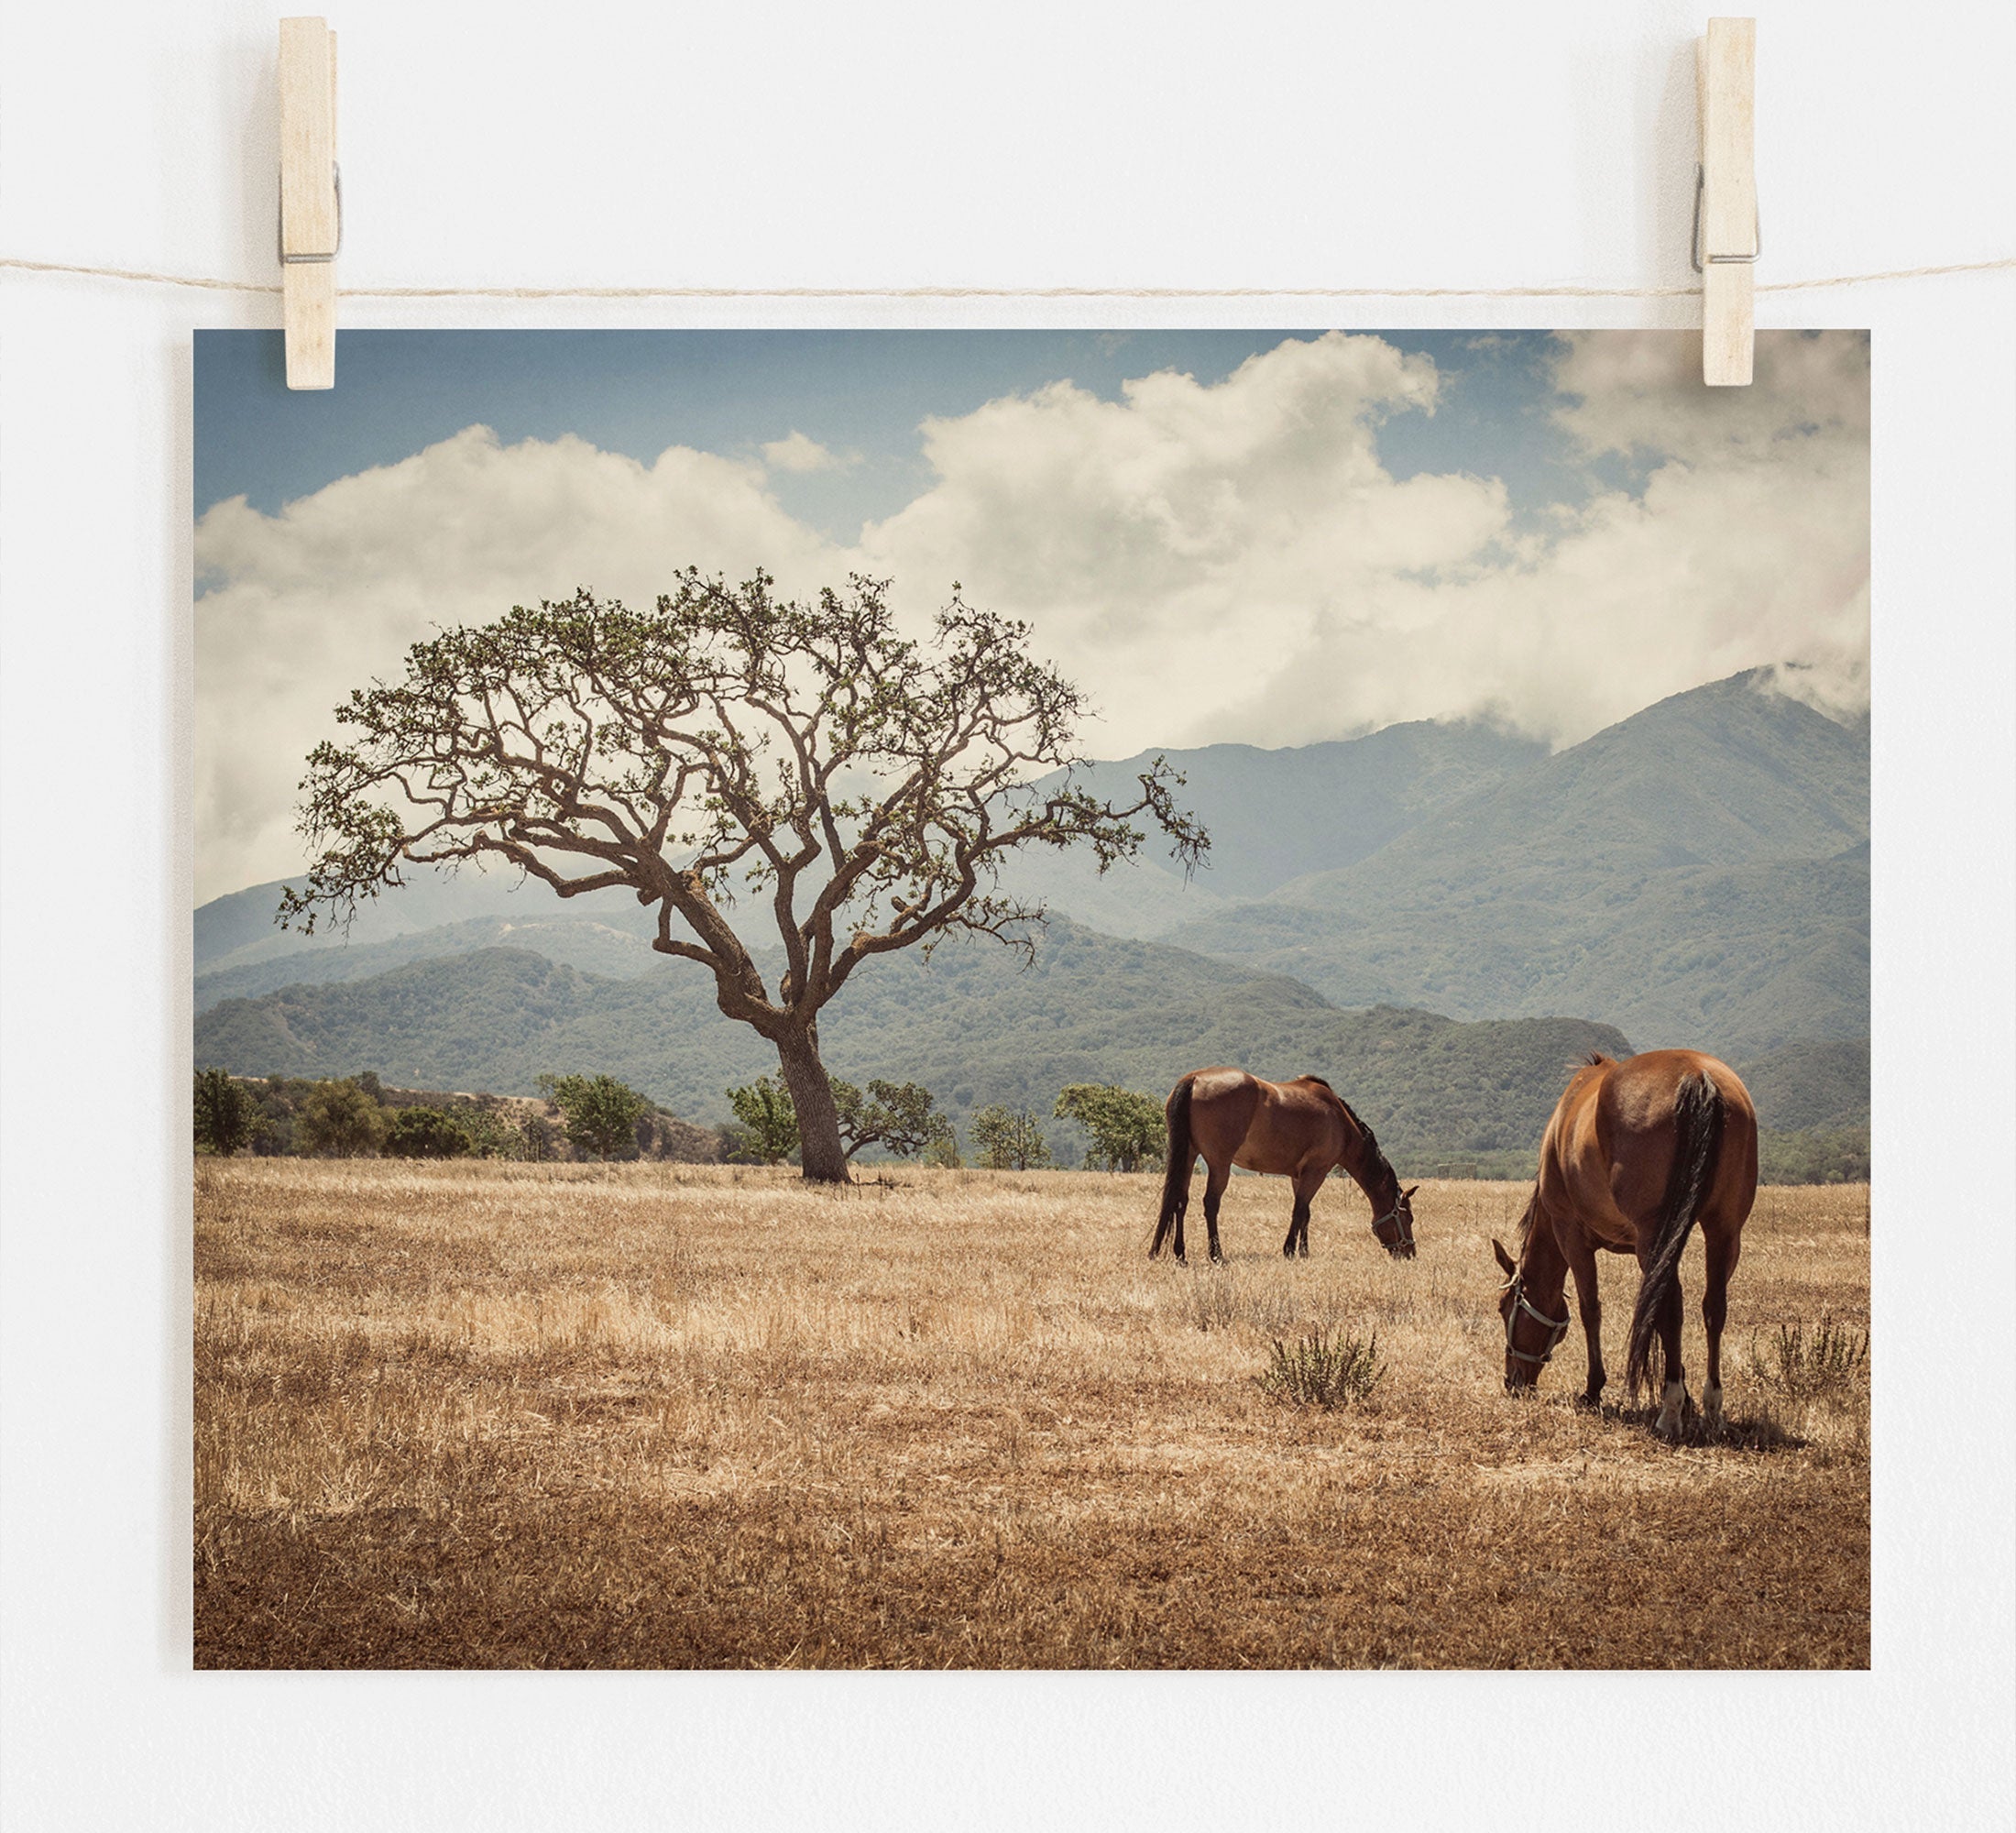 Two 'Santa Ynez Horses' graze in a sunlit field near a lone tree in the Santa Ynez Valley, with mountains and clouds in the background, depicted as a photograph hung by clothespins.